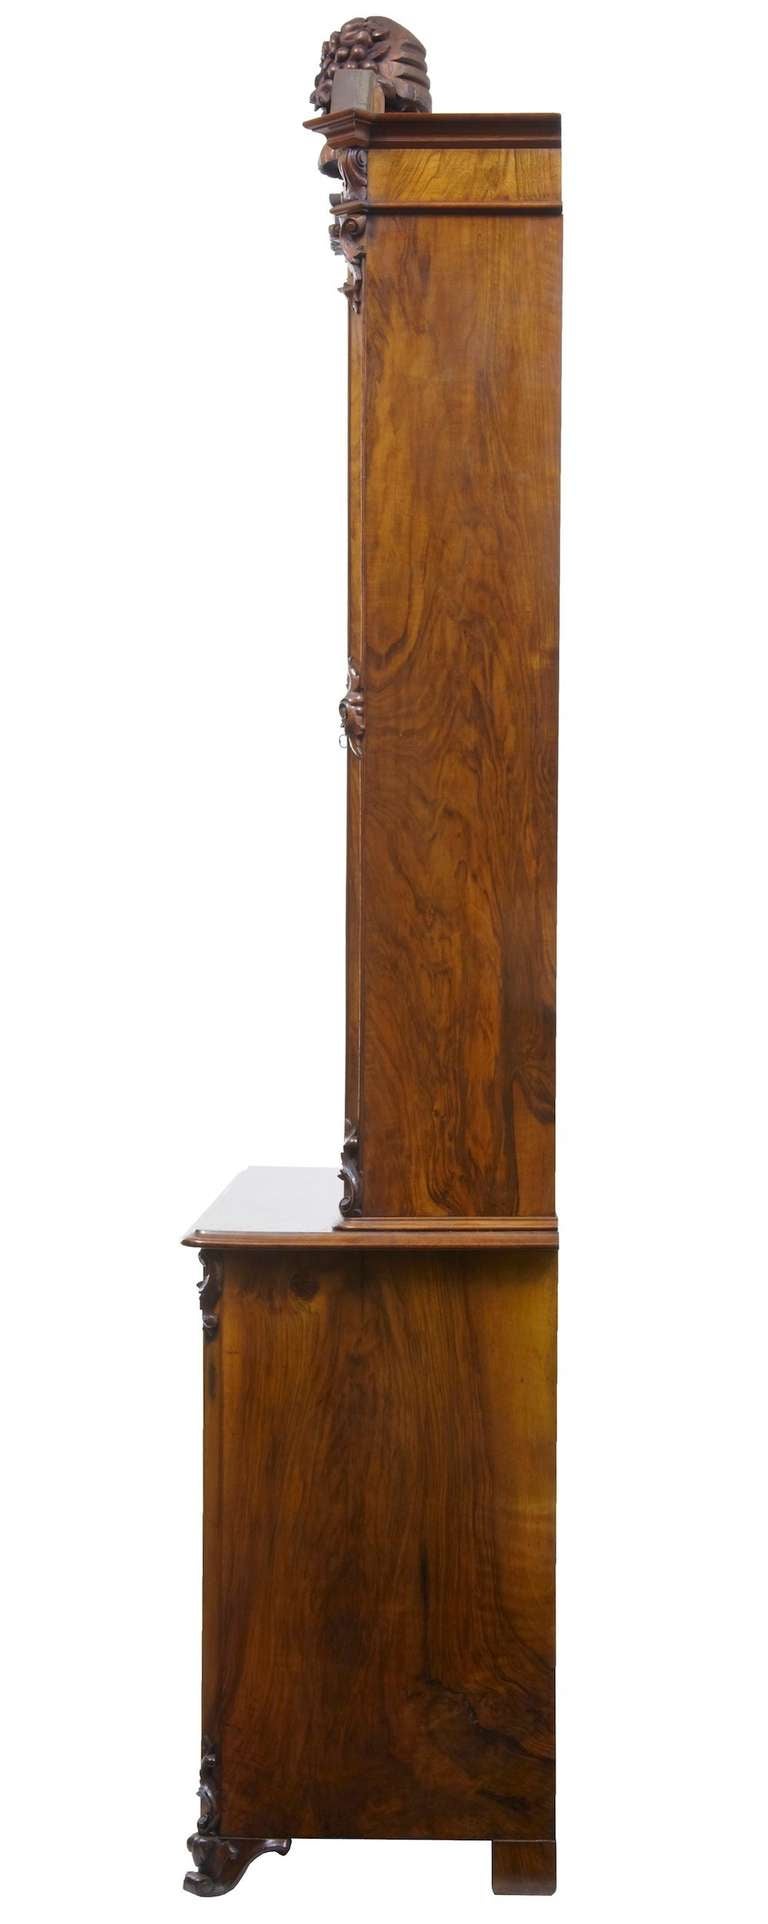 Hand-Carved Mid-19th Century Victorian Burr Walnut Bookcase with Architectural Cornice